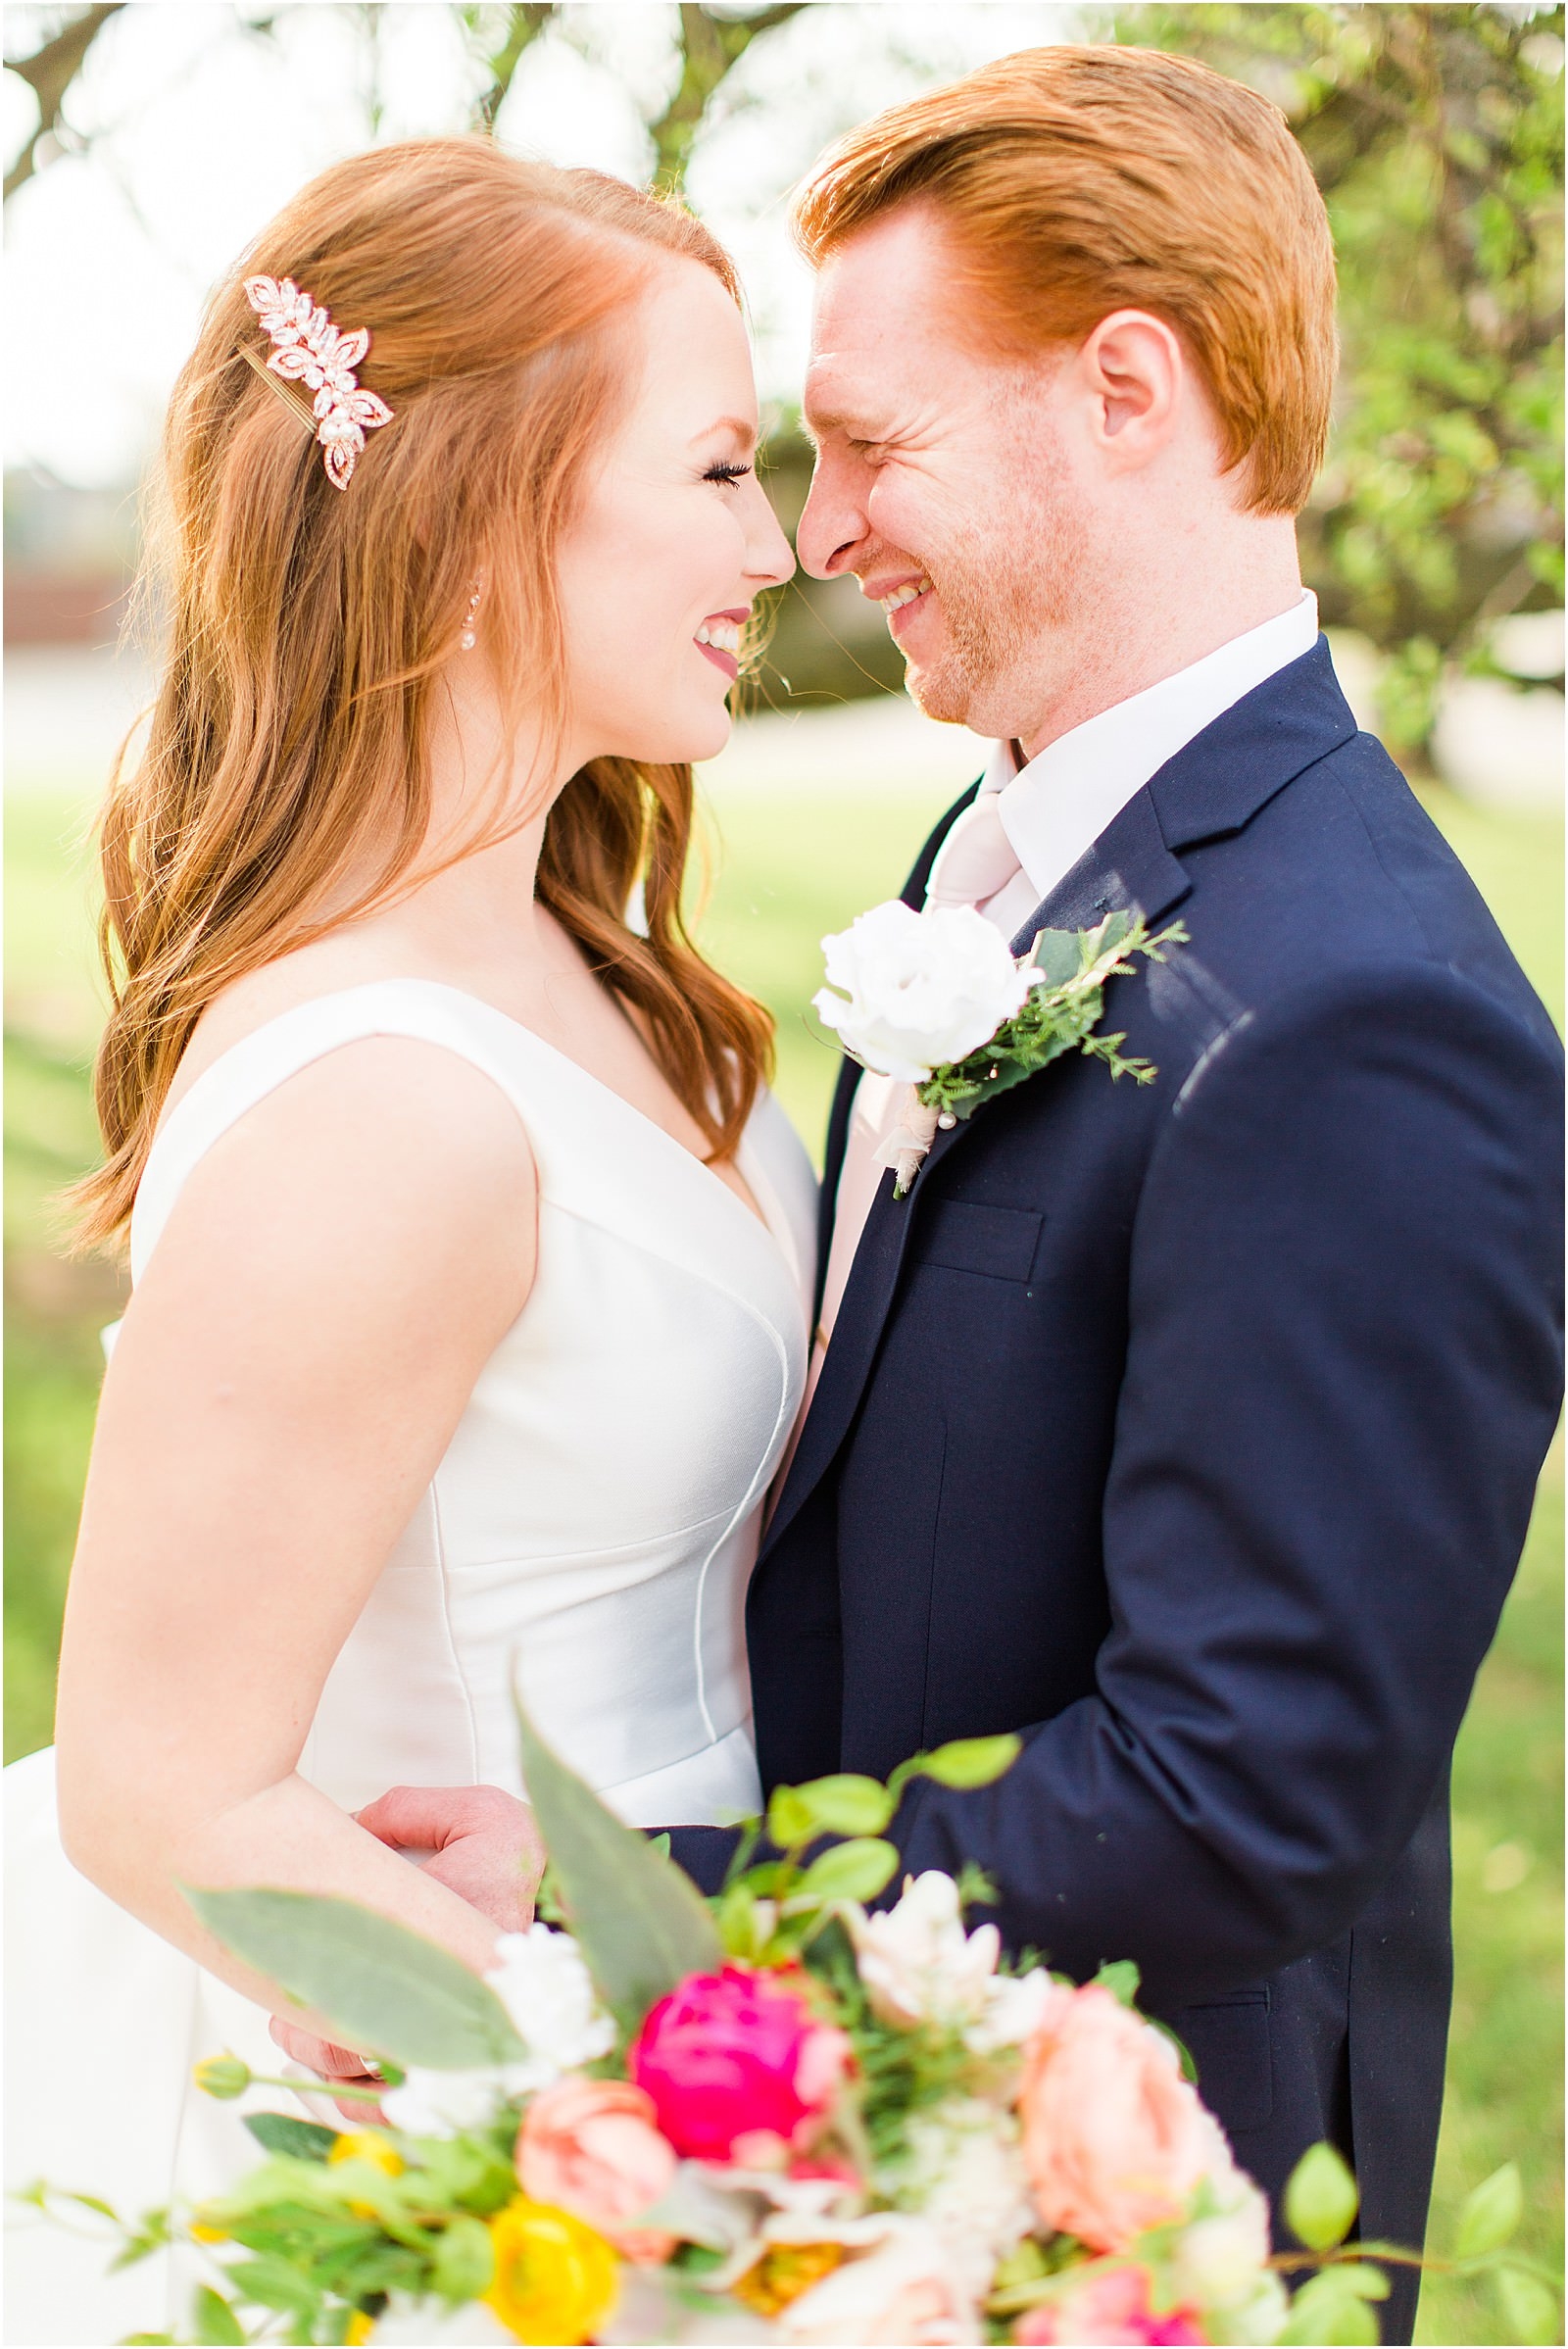 A Perfectly Intimate Wedding in Downtown Evansville Indiana | Jennah and Steve | Bret and Brandie Photography | | 0062.jpg